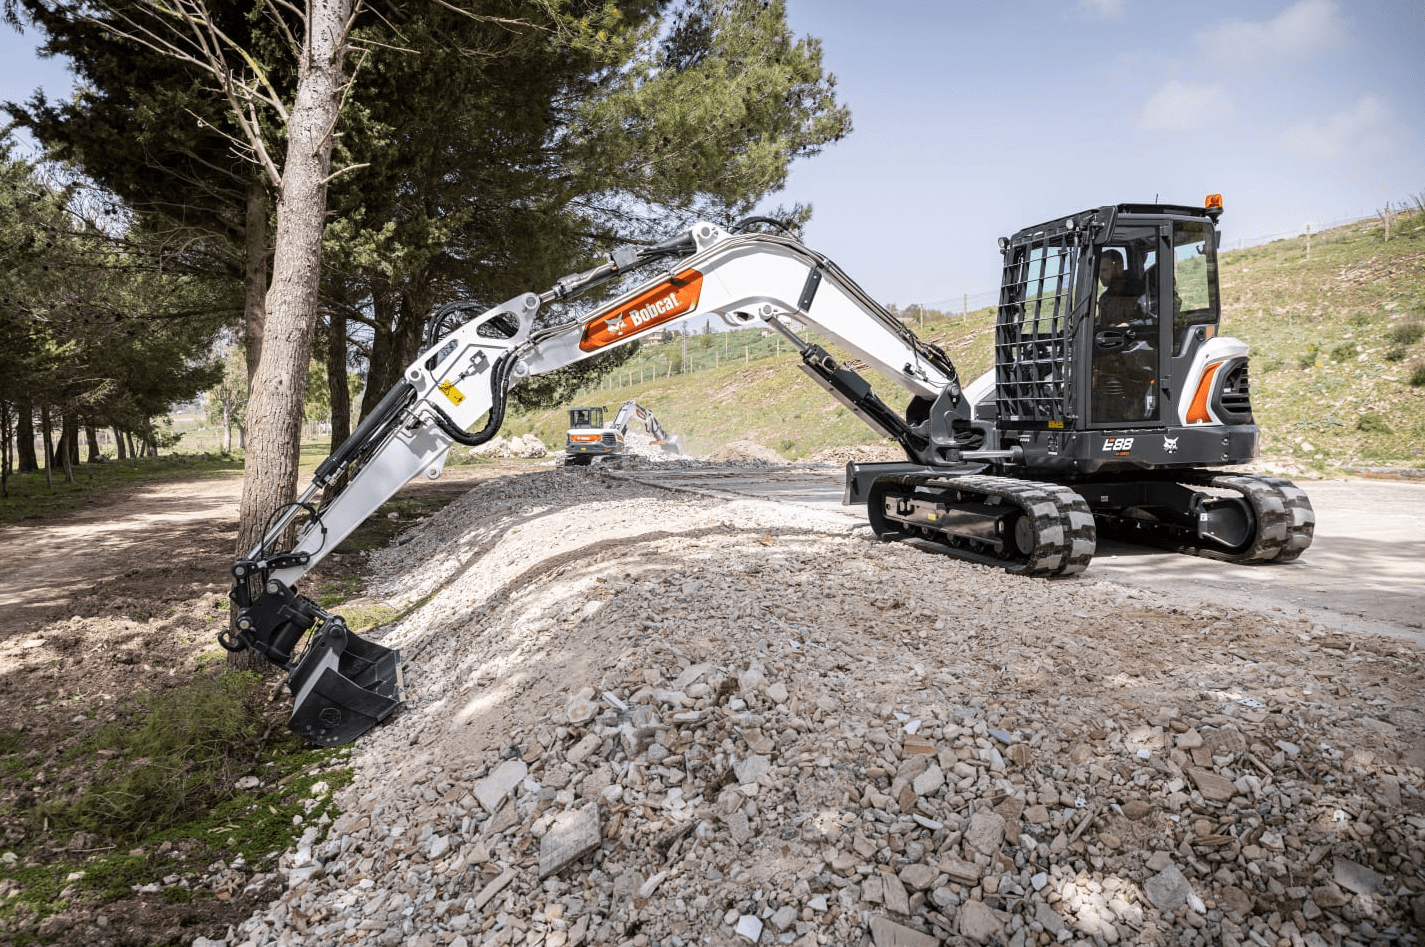 Browse Specs and more for the E88 Compact Excavator - White Star Machinery